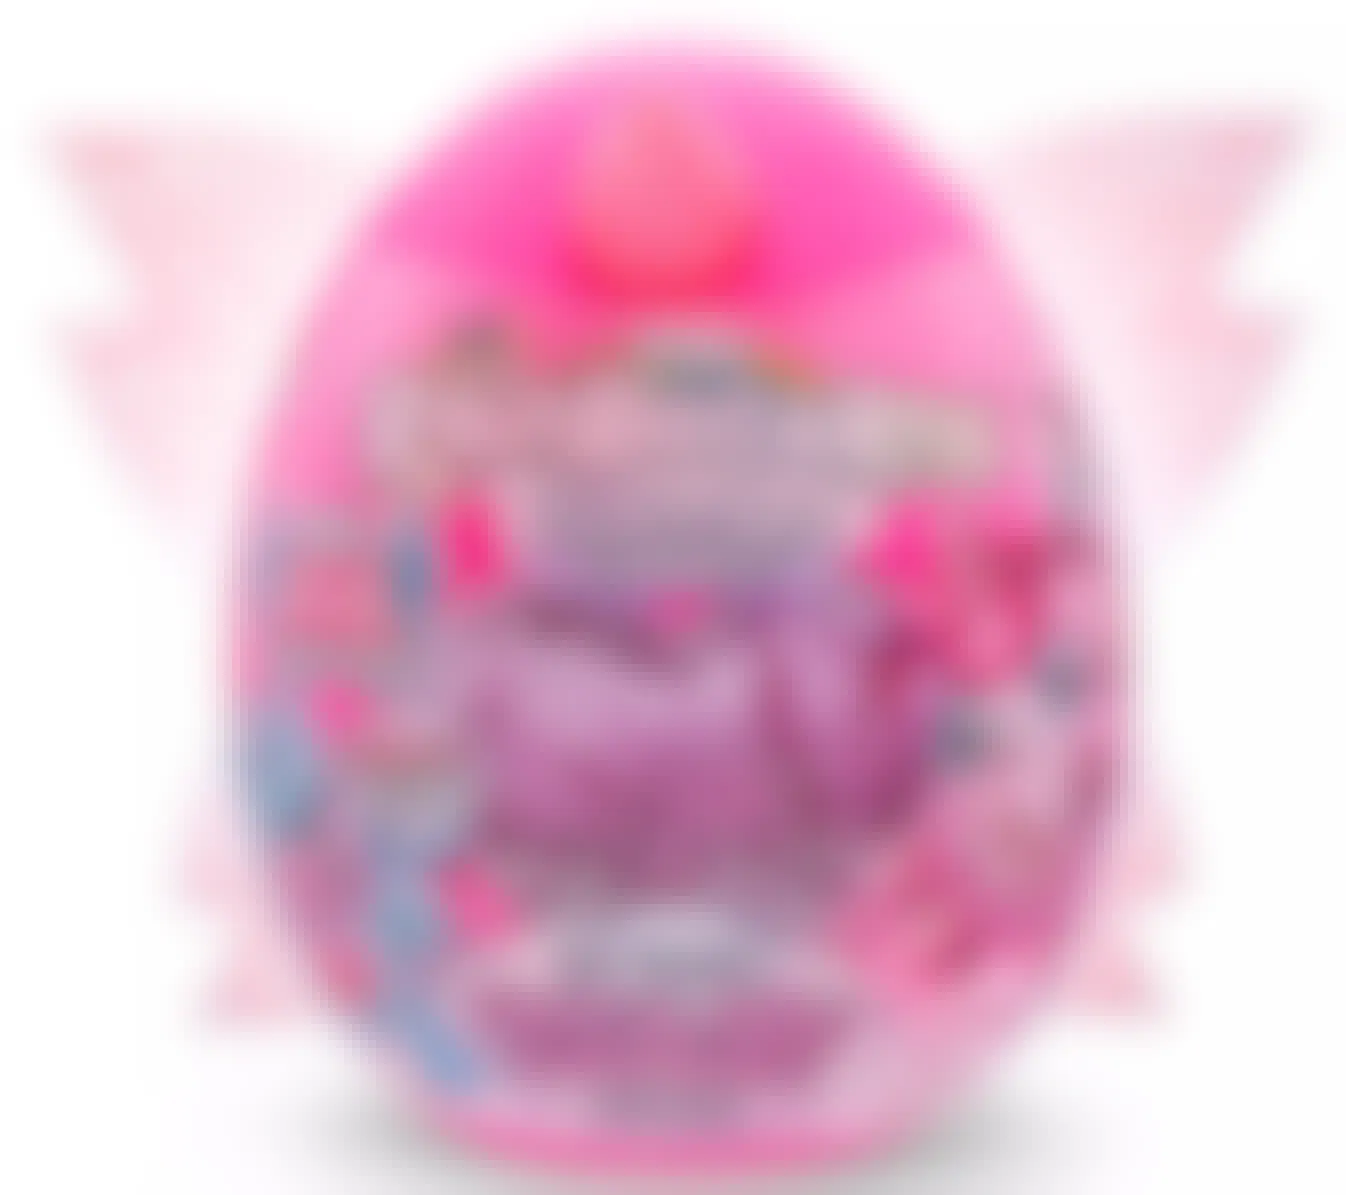 a pink rainbowcorn fairycorn surprise toy in a pink egg with wings